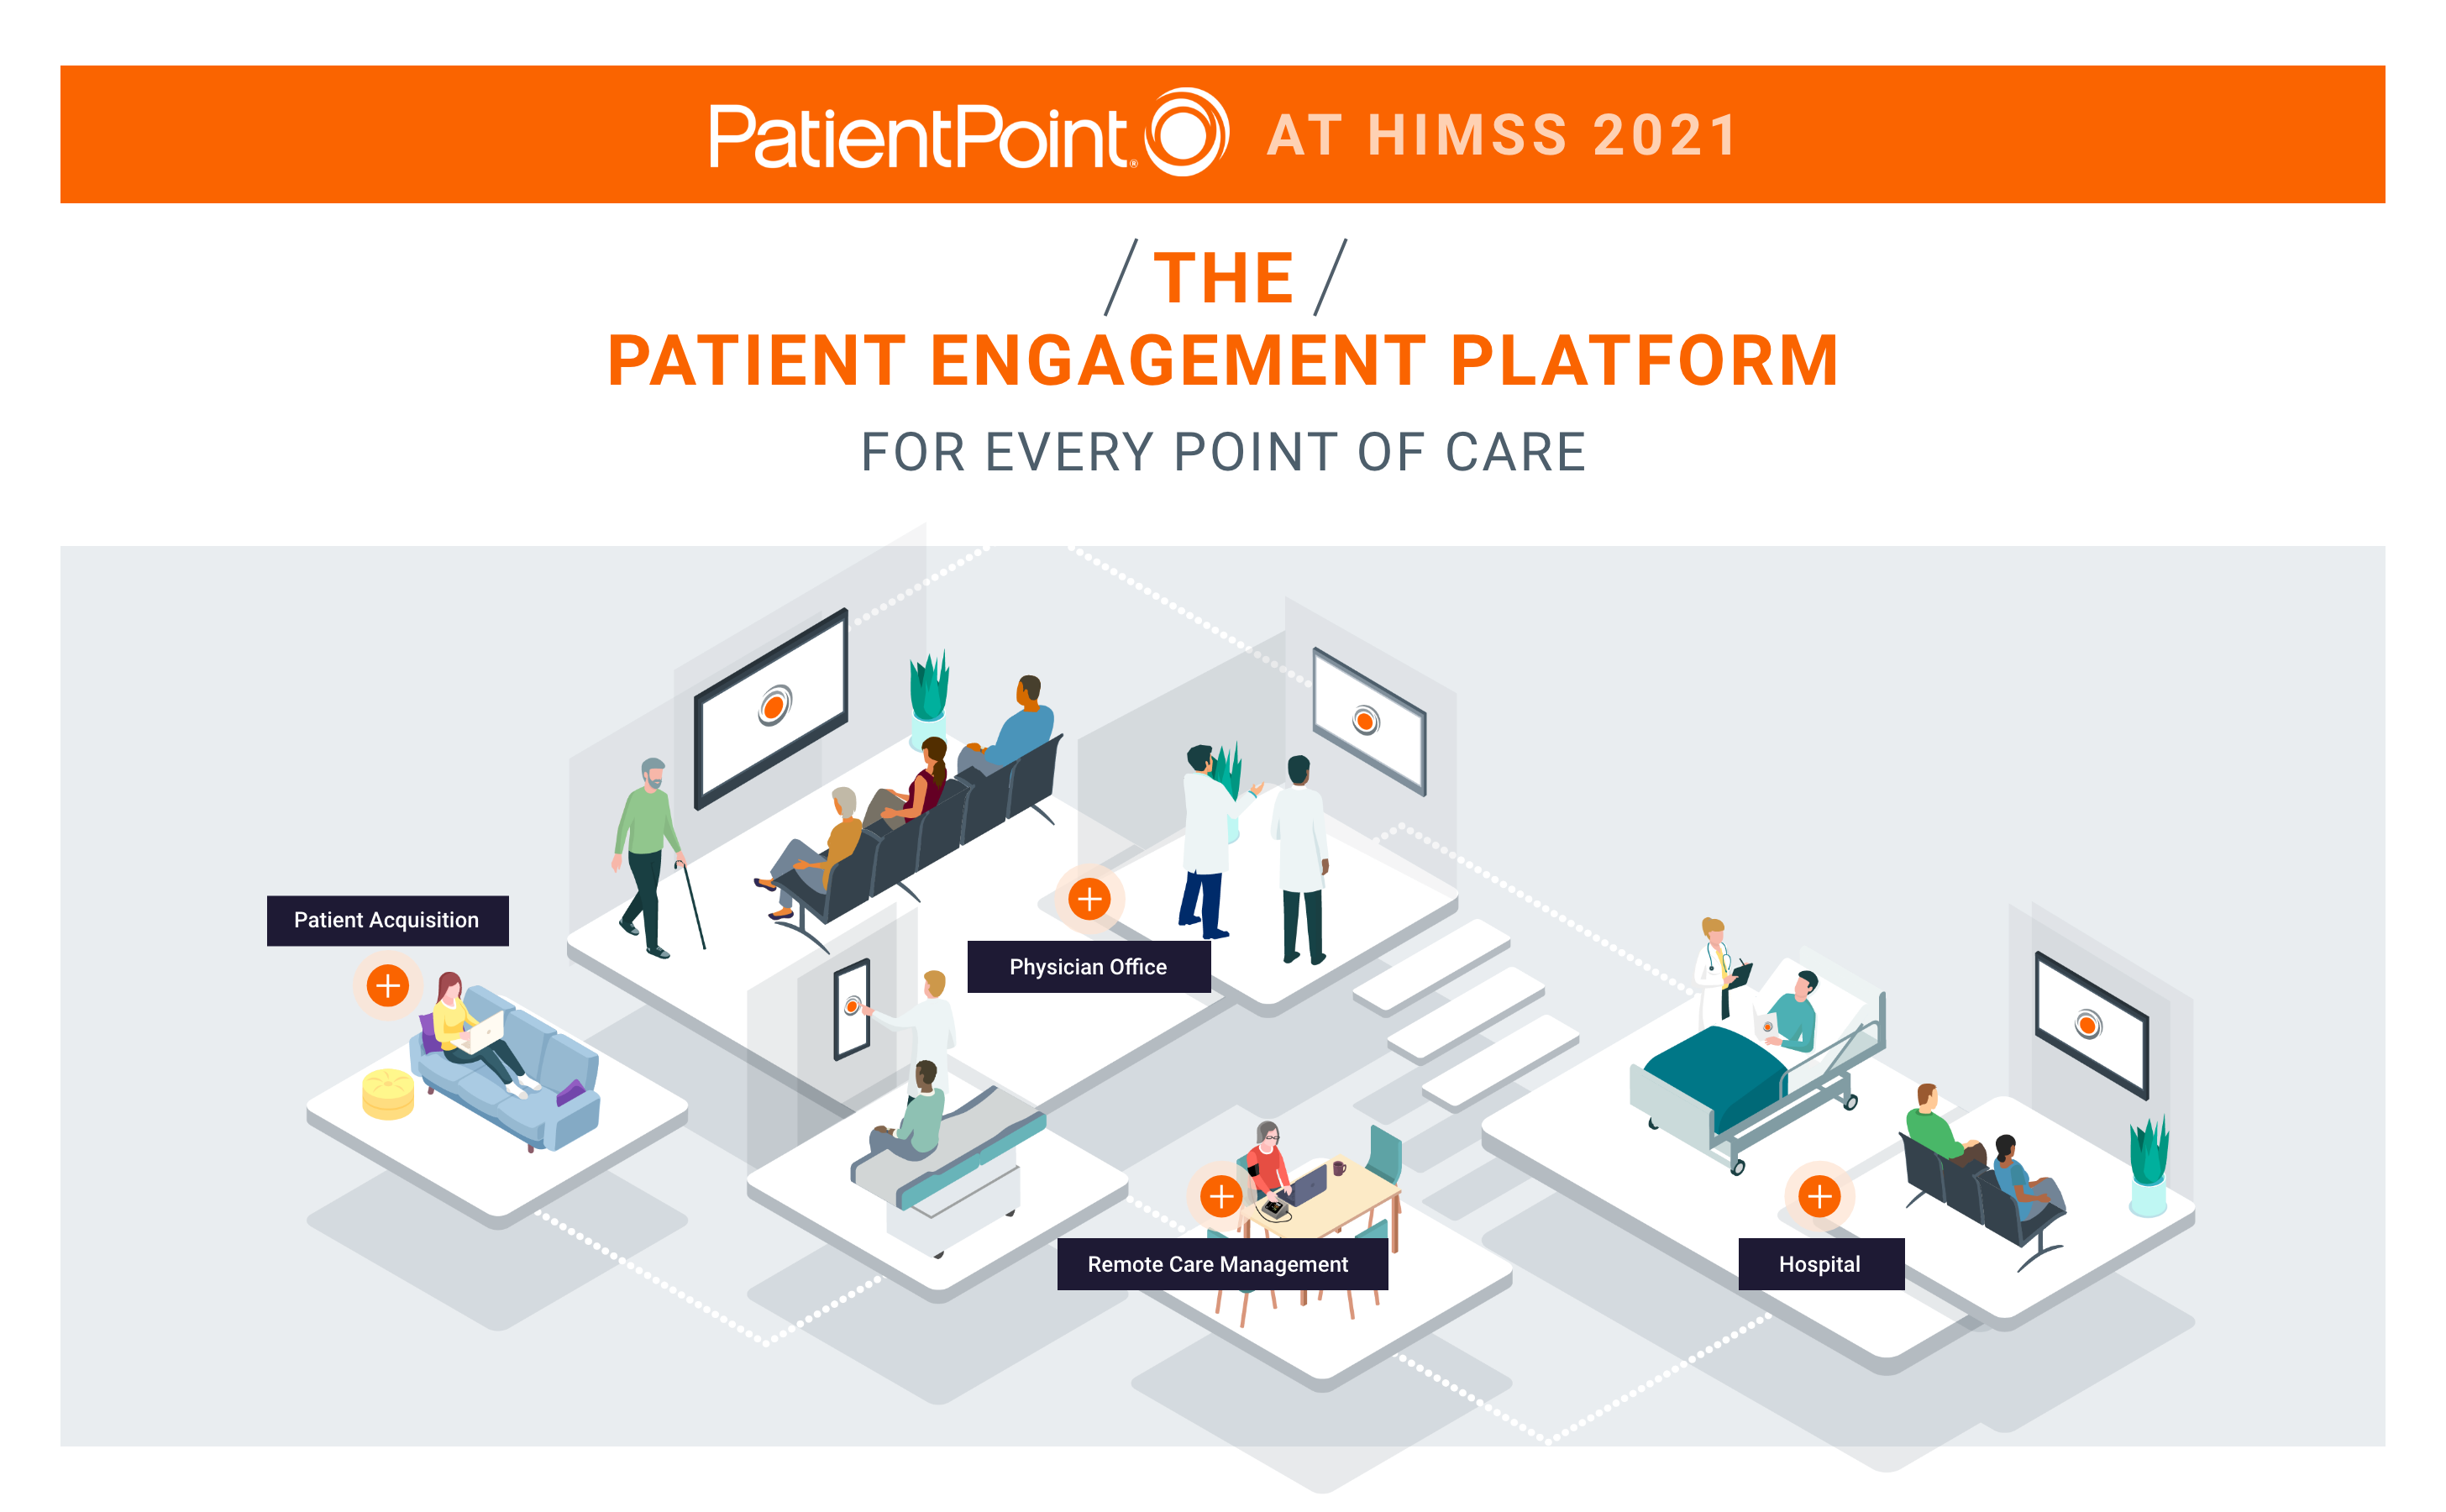 PatientPoint at HIMSS 2021. The Patient Engagement Platform for every point of care.